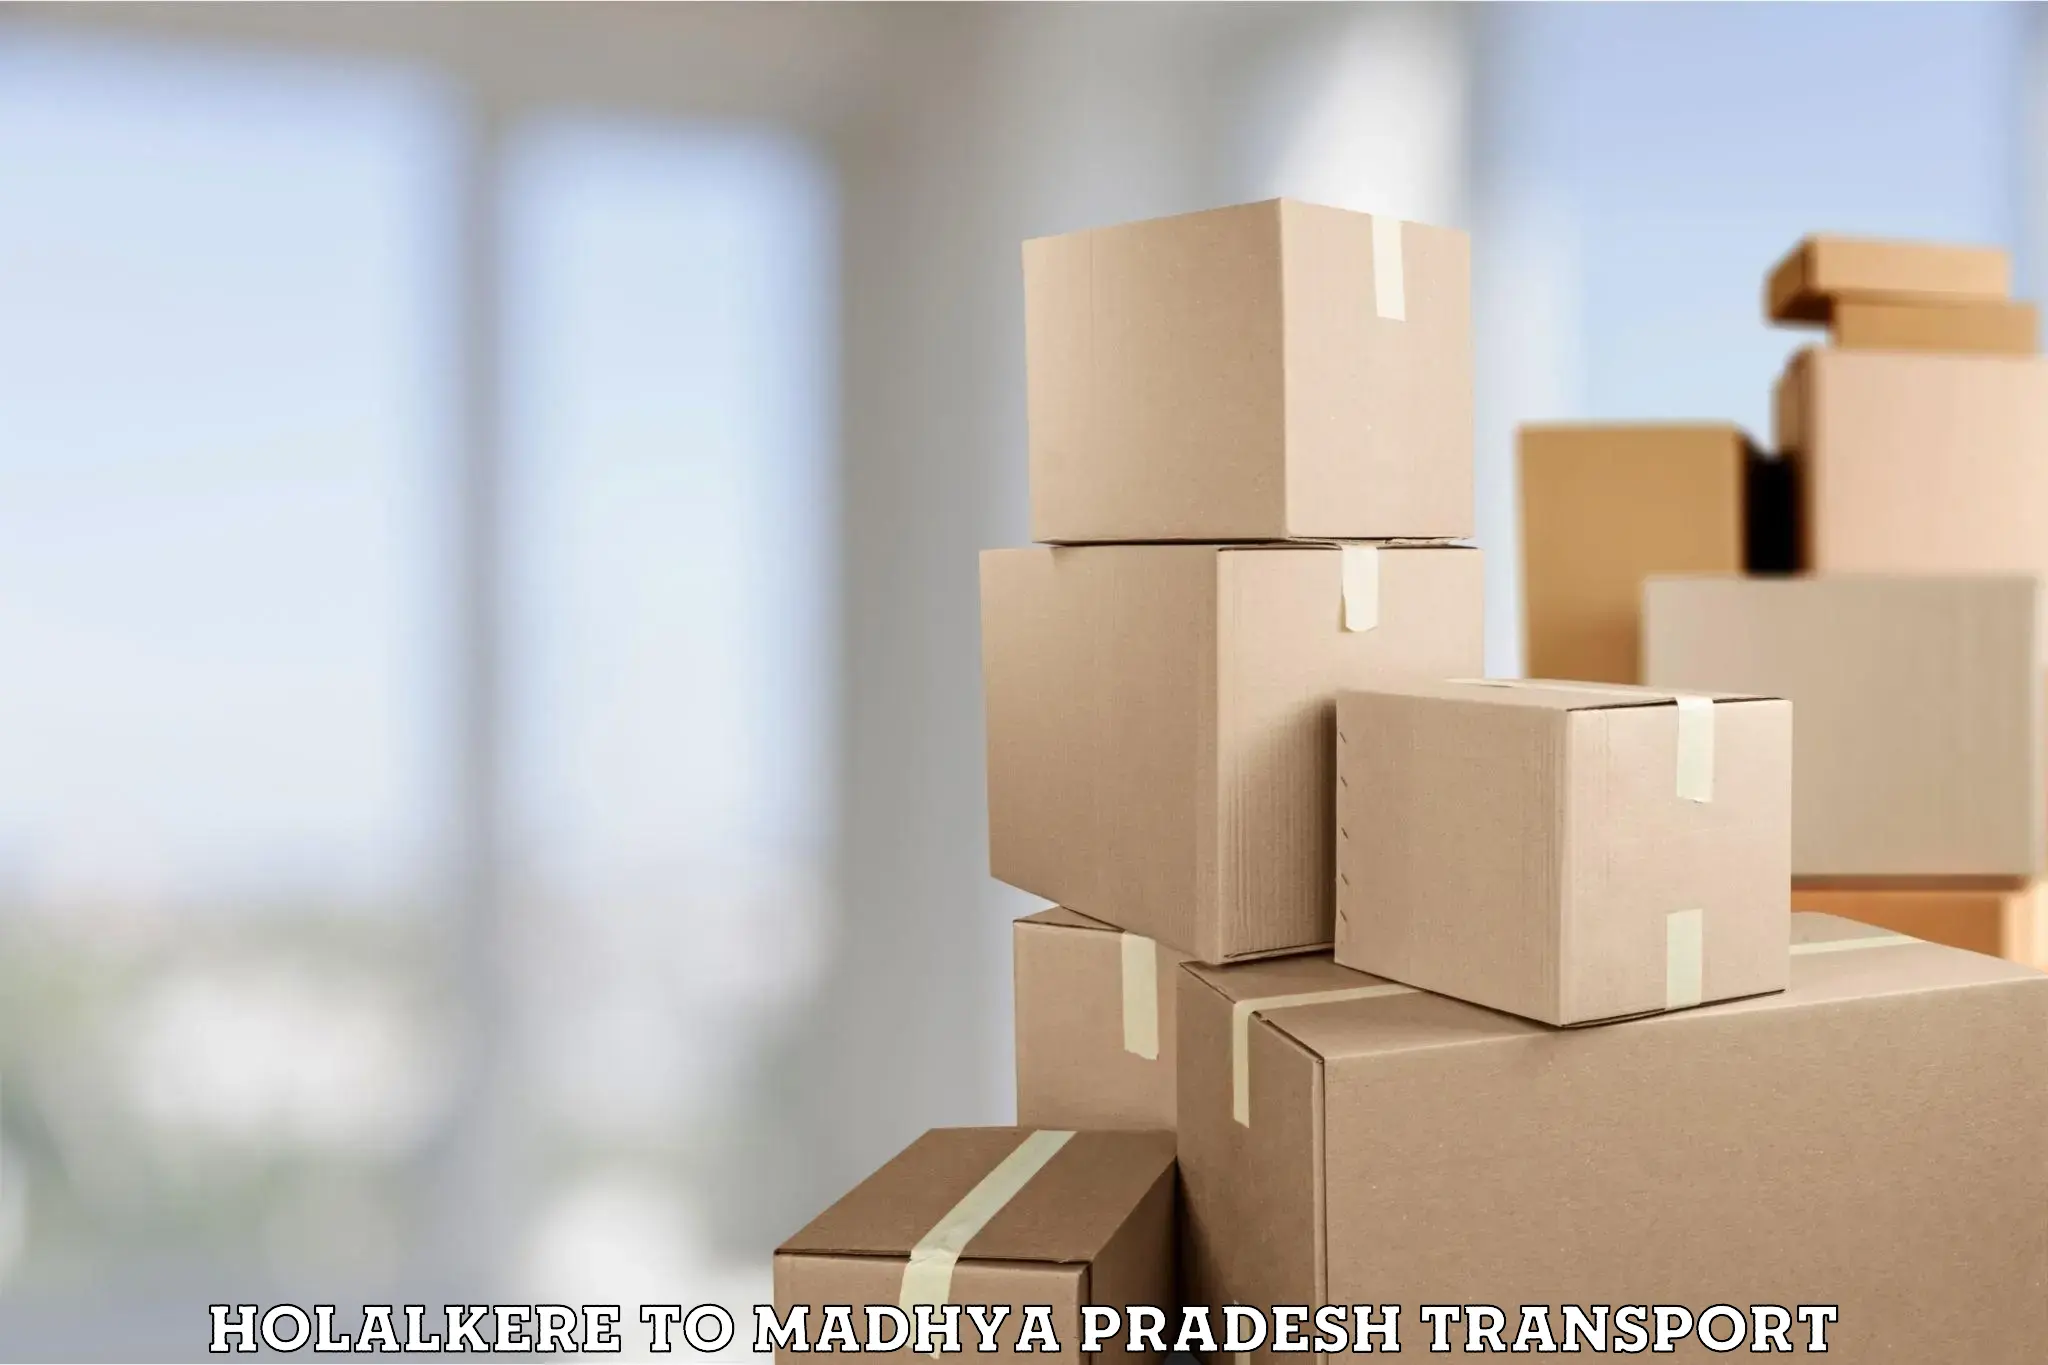 Cargo transport services Holalkere to BHEL Bhopal